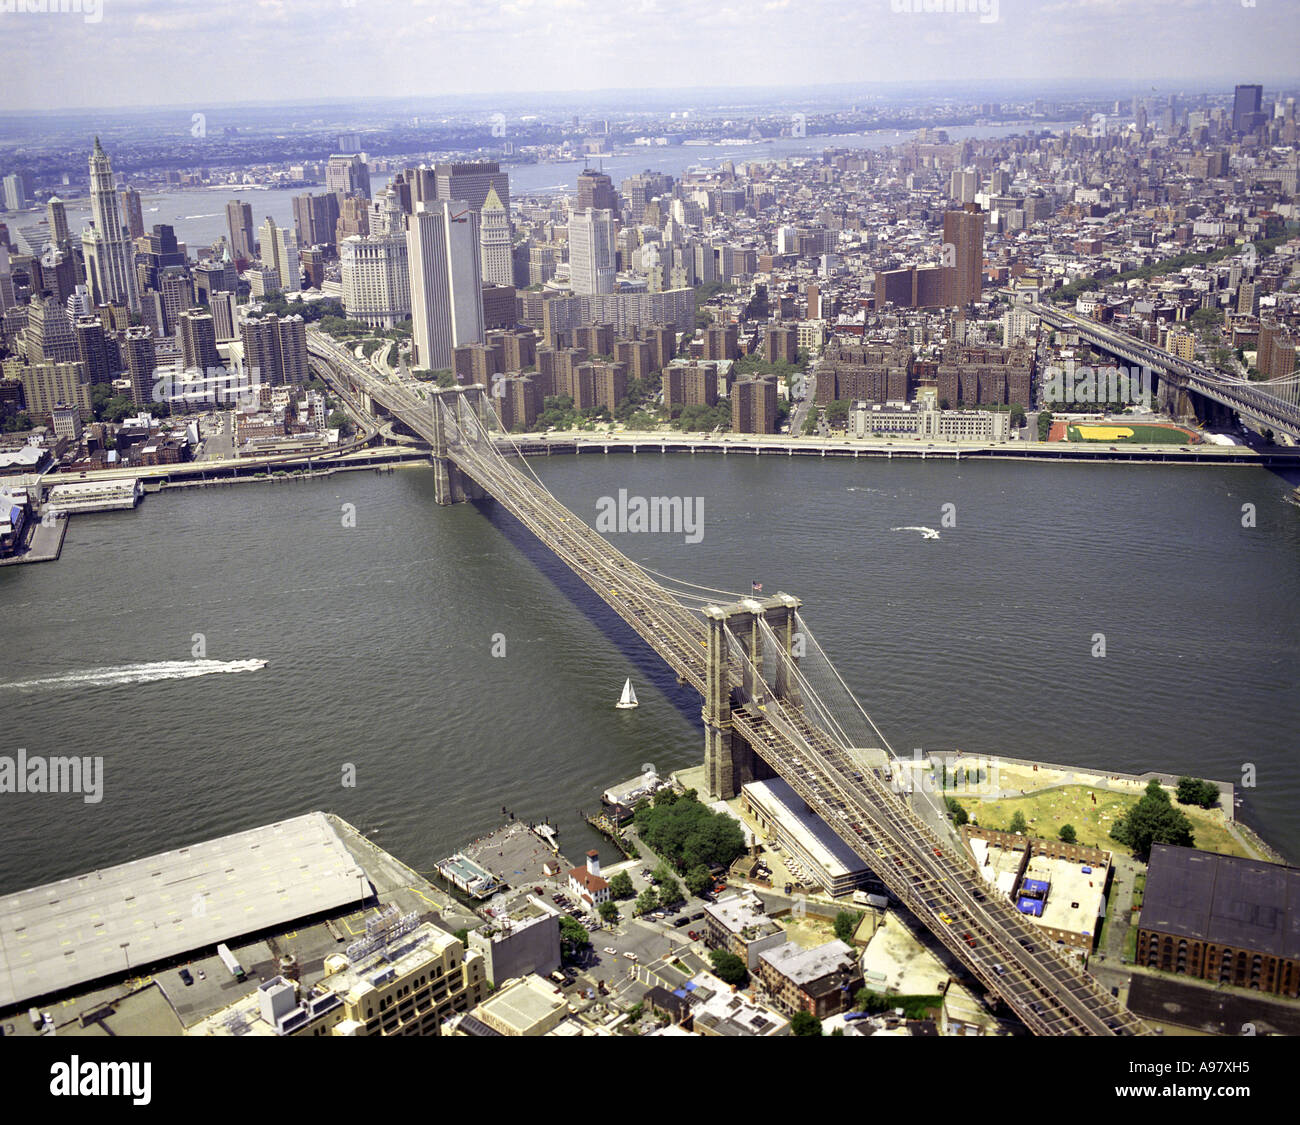 Aerial view of the Brooklyn Bridge, located on the East River, New York City, U.S.A. Stock Photo